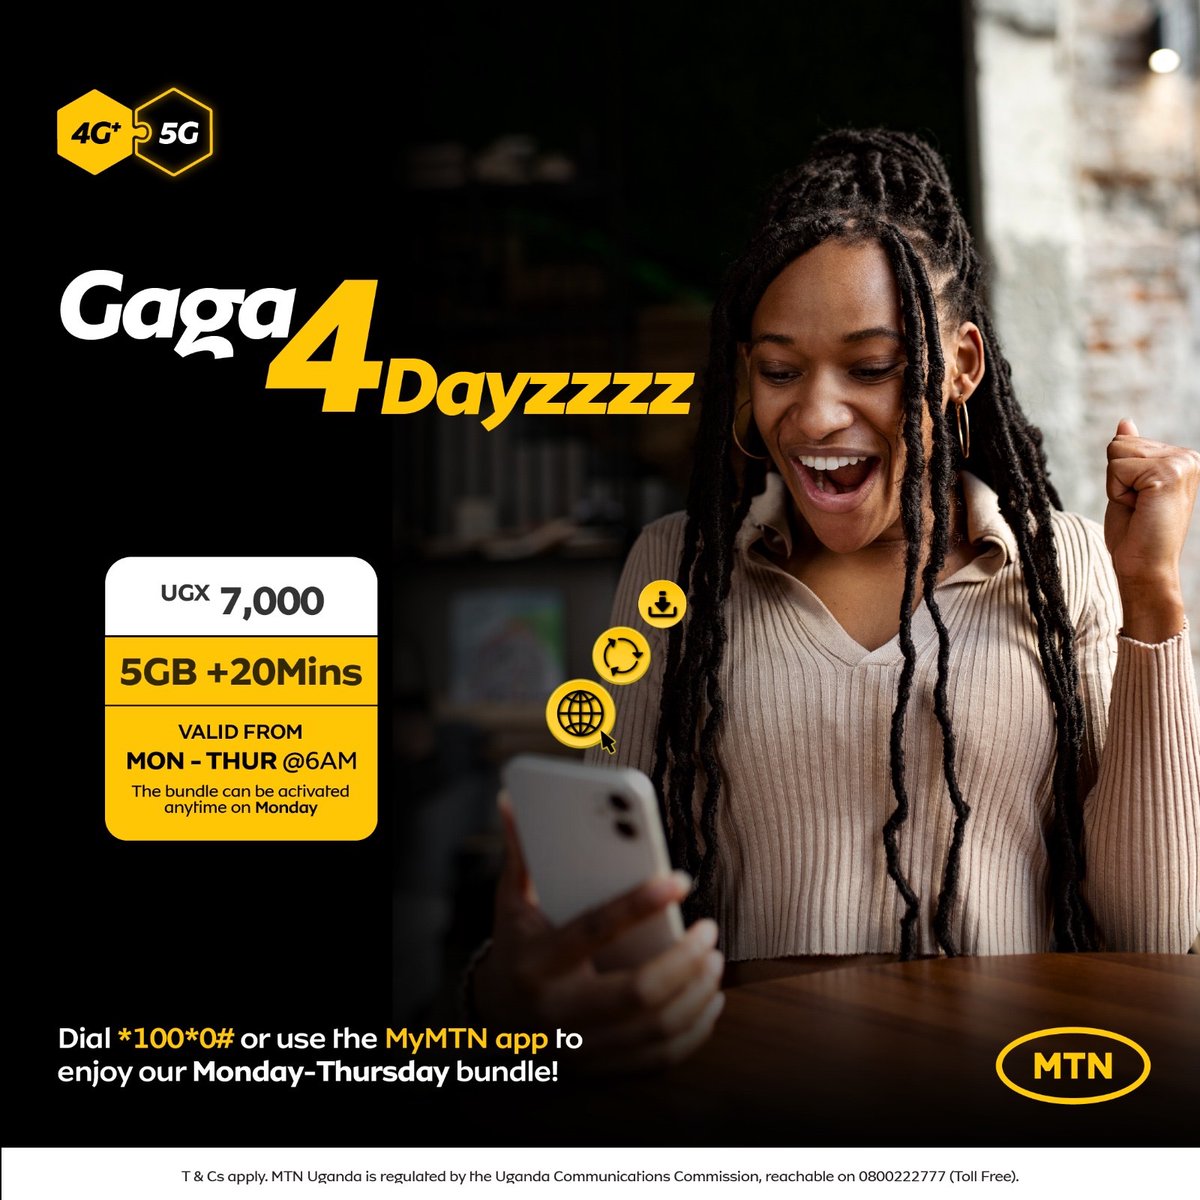 Jump into this new week with the power to surf with confidence.😎

📣 Every monday, load your #Gaga4Dayzzzz bundle— 5GB + 20Min, Valid between Monday - Thursday at only Ugx 7,000/-

📲 Dial *100*0# or use the #MyMTN app to activate before the day breaks.
#TogetherWeAreUnstoppable